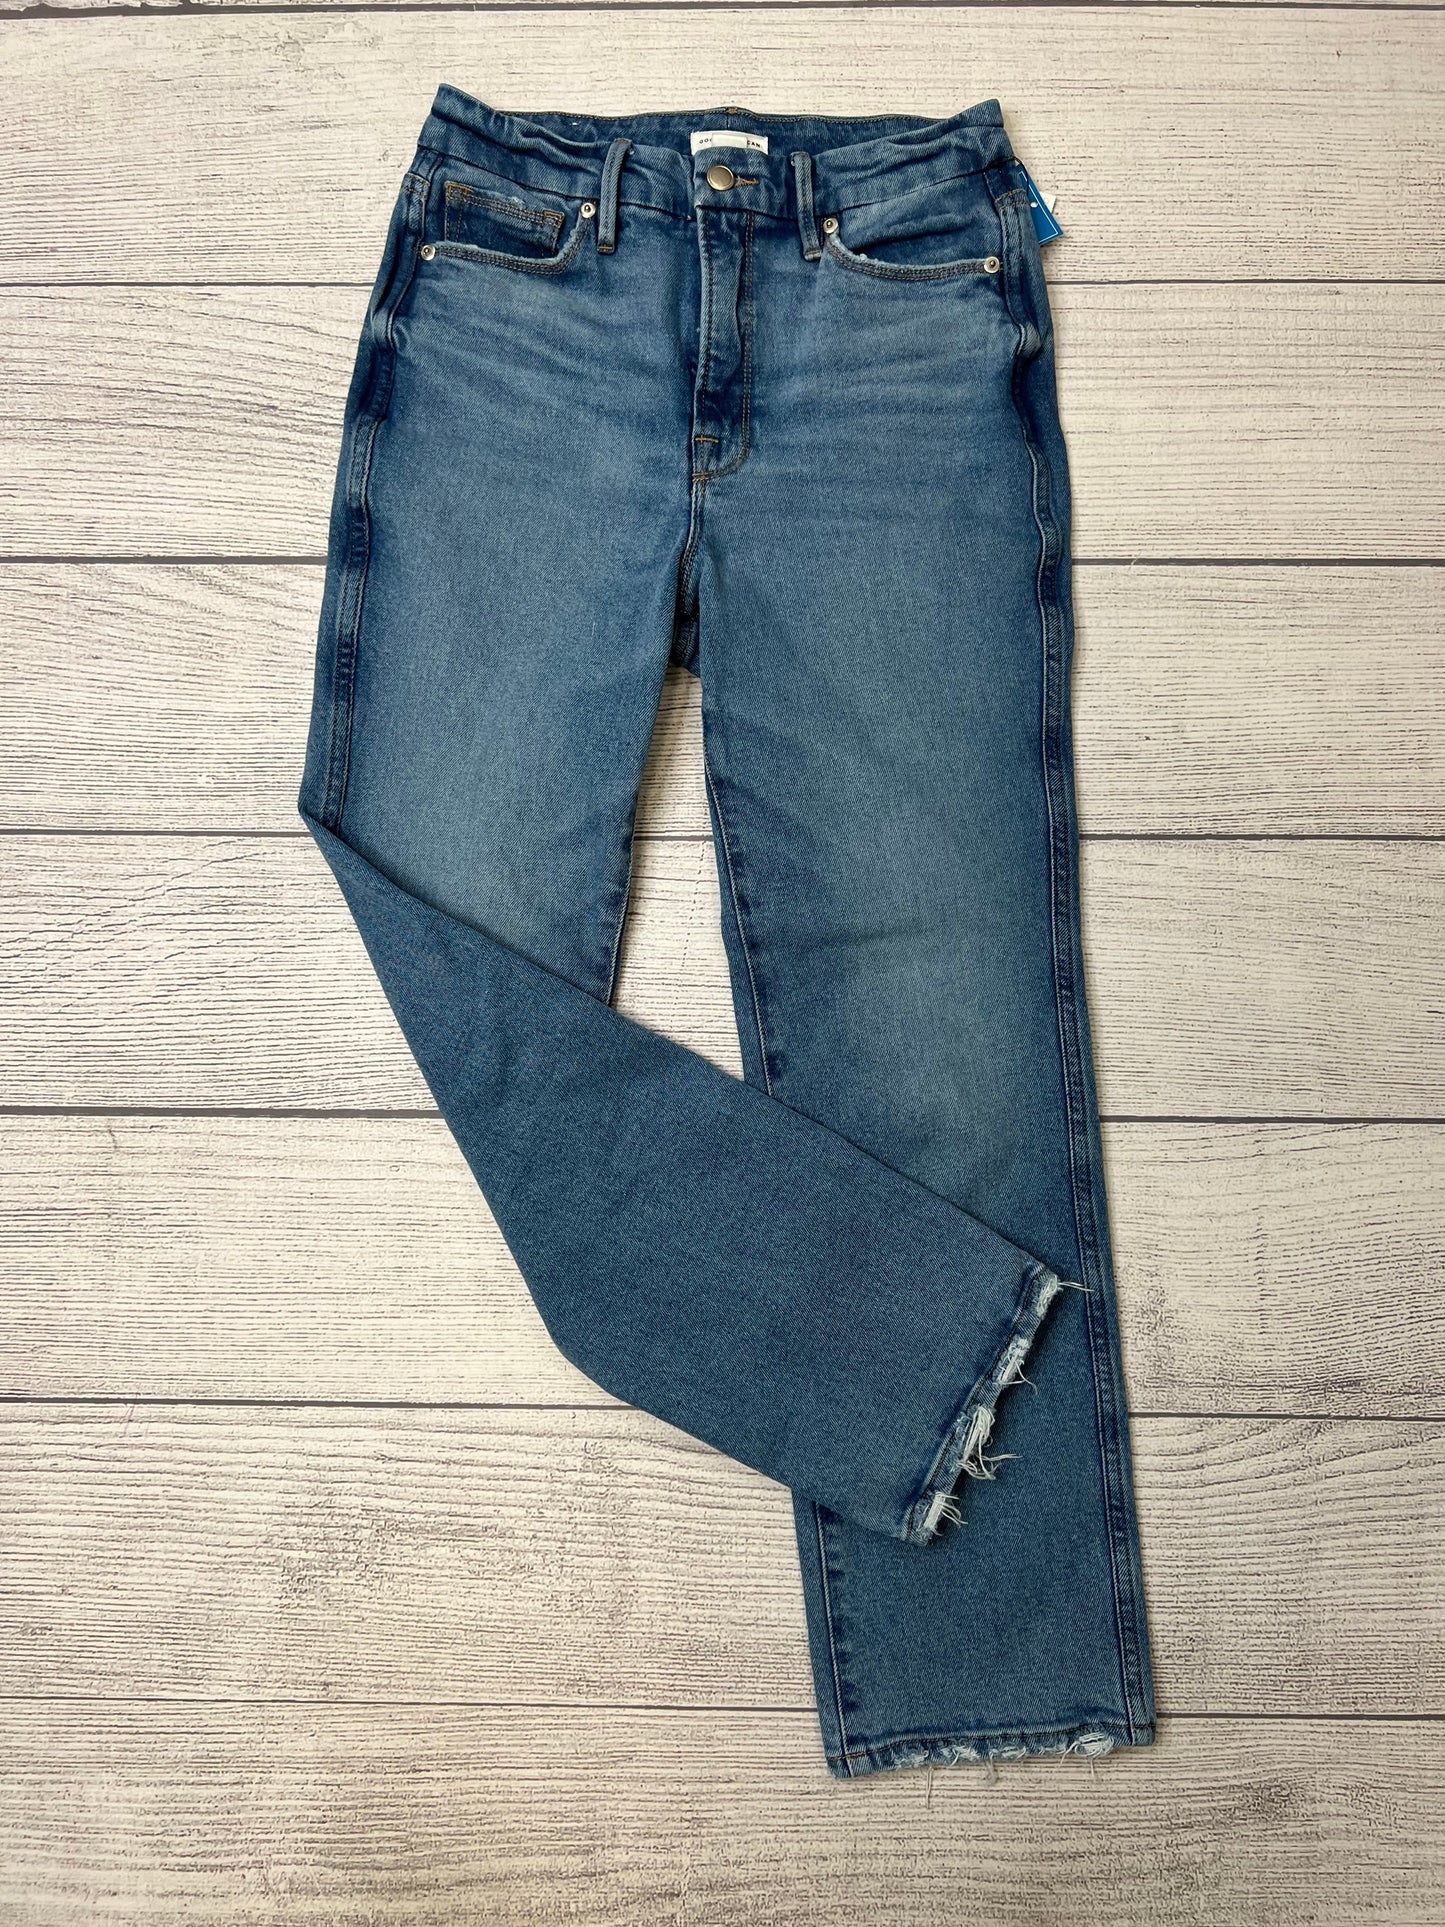 Jeans Designer By Good American  Size: 4